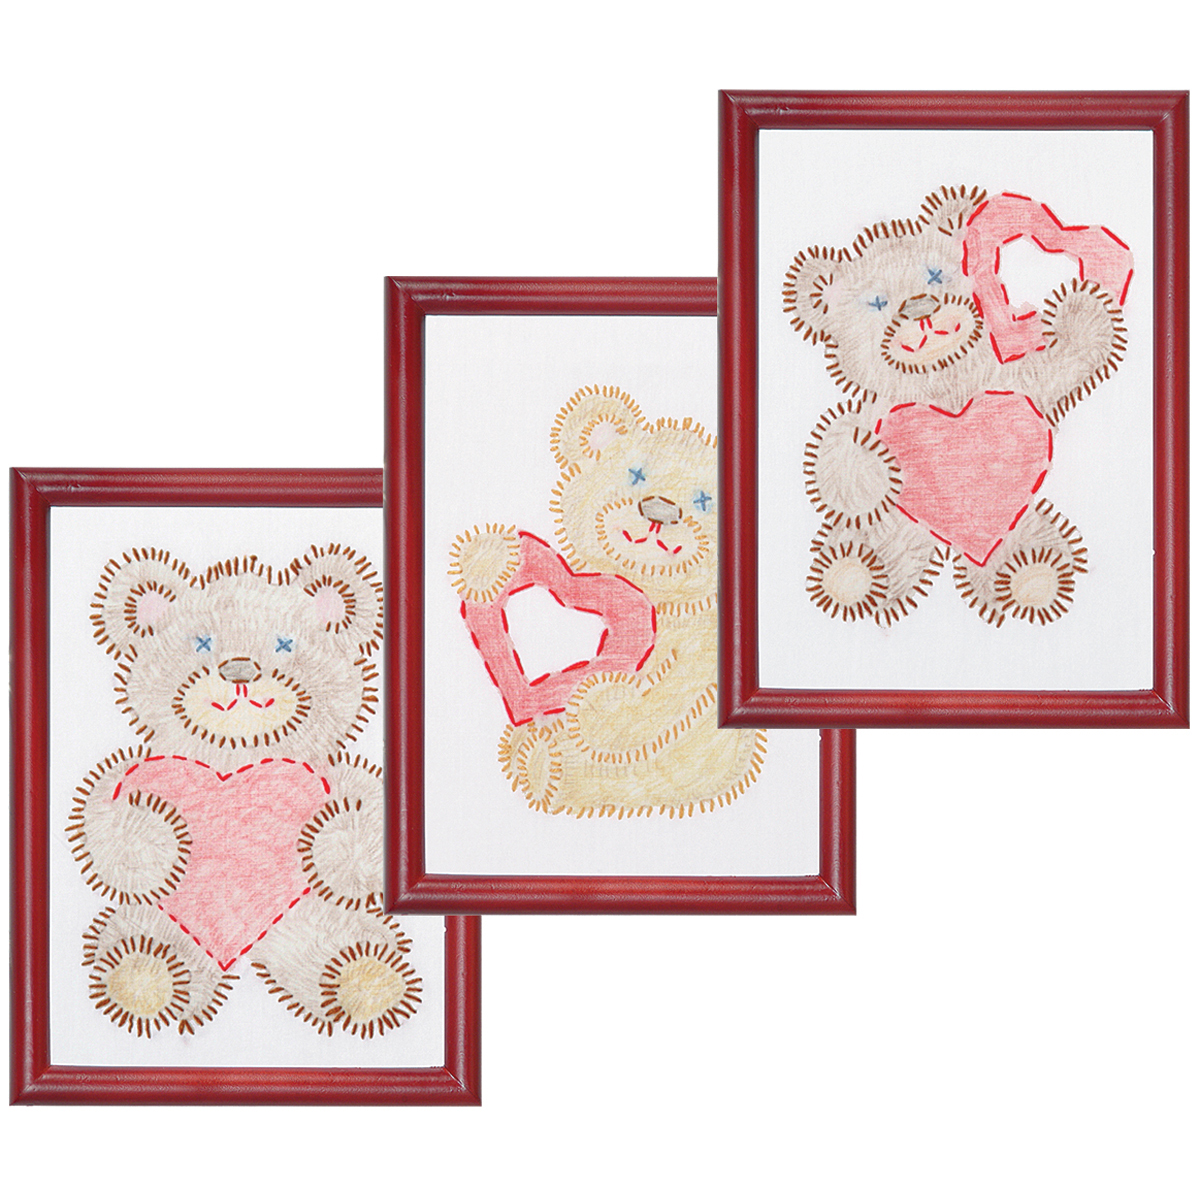 Stamped Embroidery Kit Beginner Samplers 6" x 8" 3 per package, Fuzzy Bears - image 3 of 3